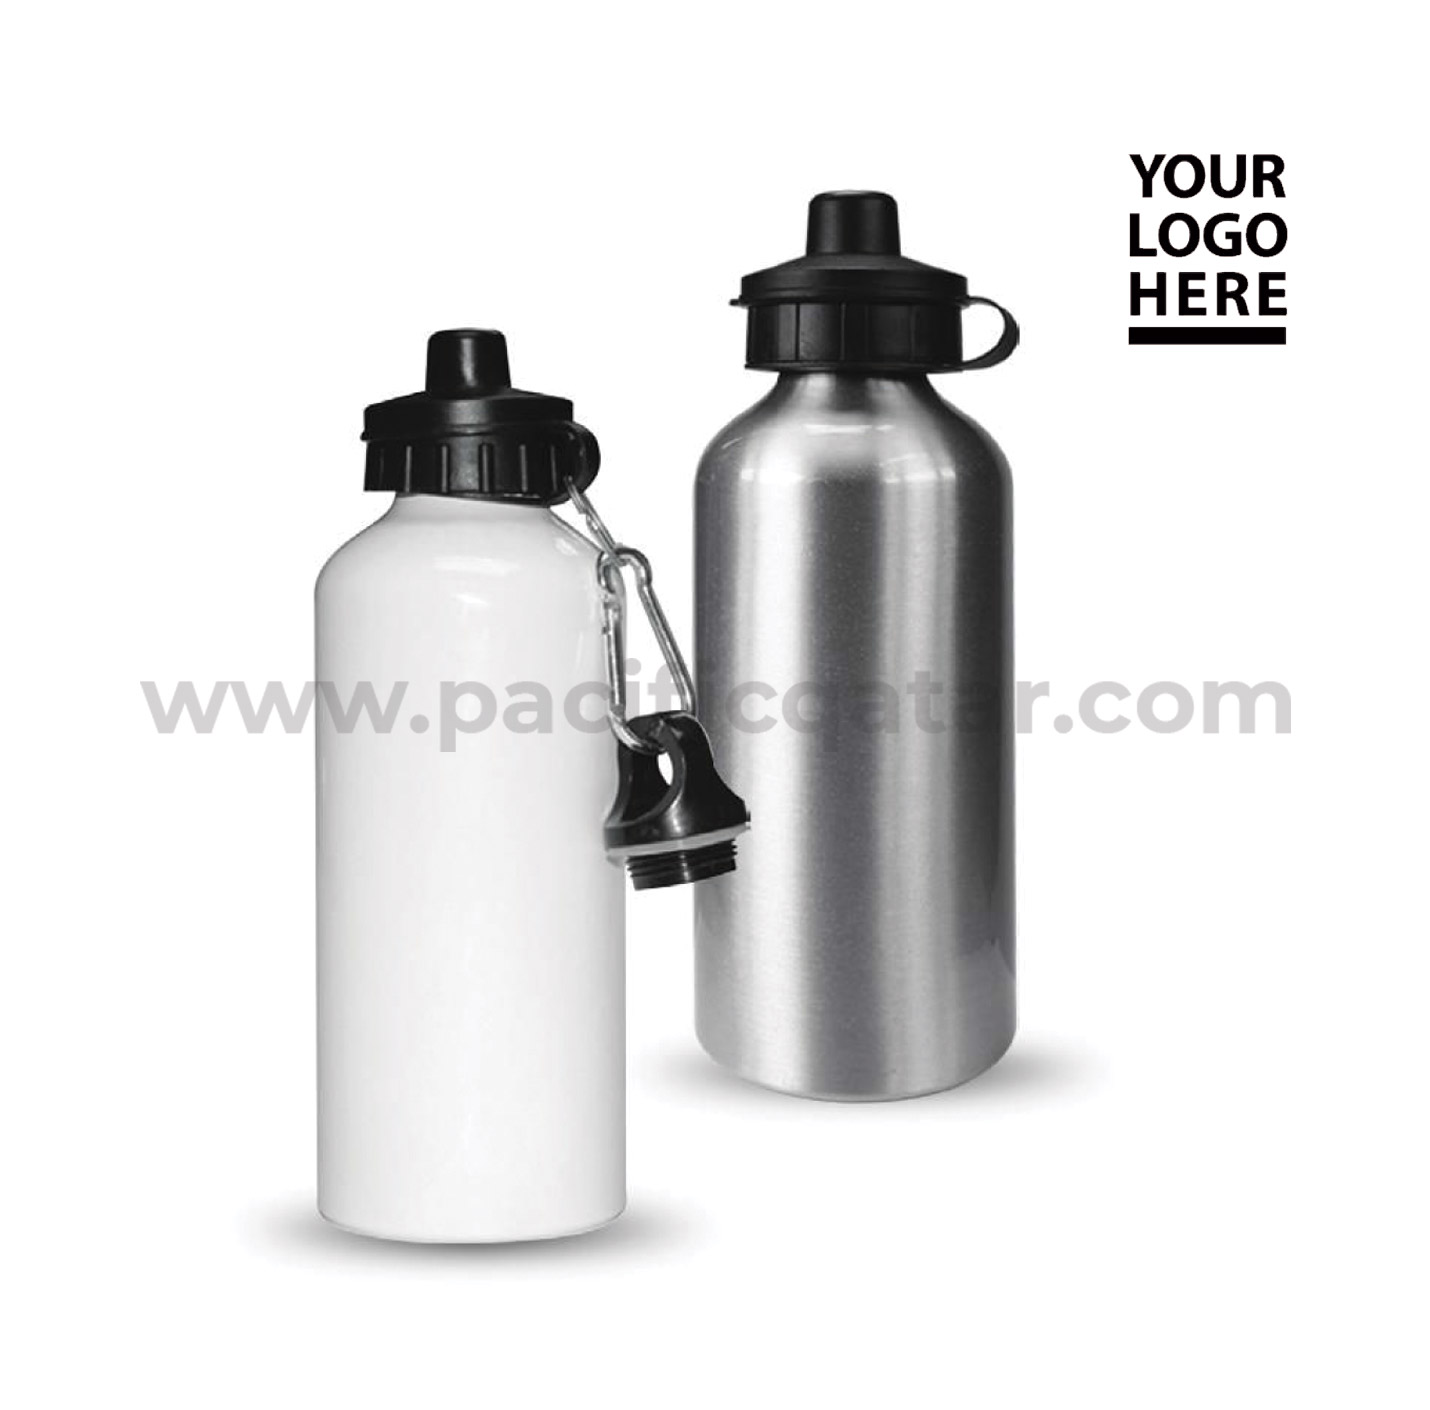 Aluminum water bottle with suction cap in top